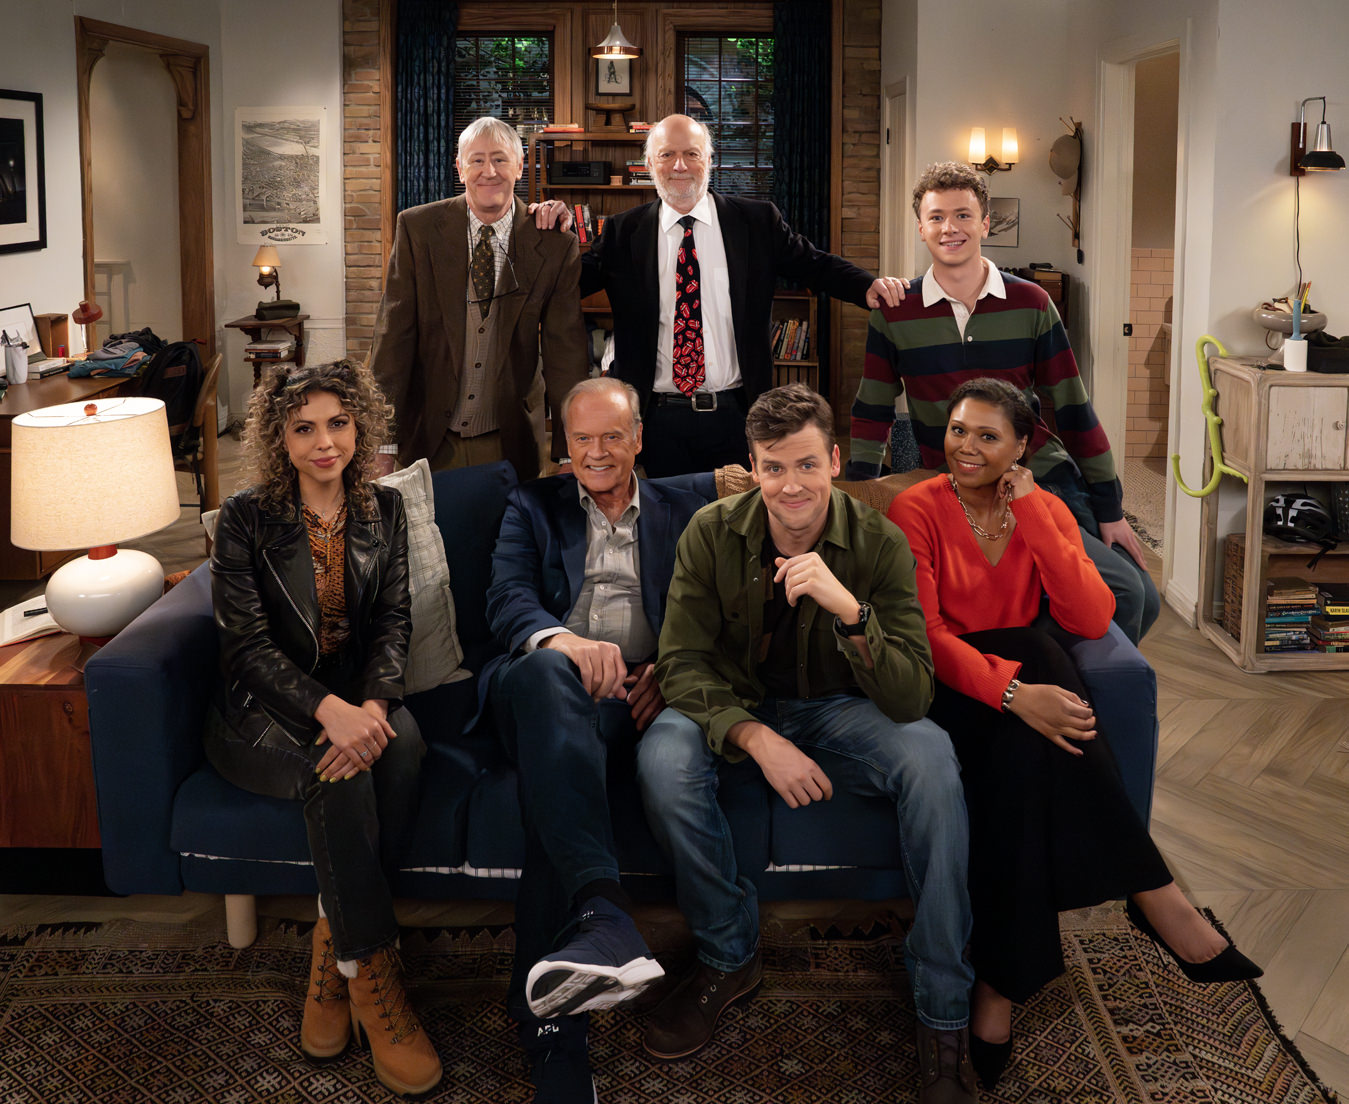 From top, left to right: BTS of Nicholas Lyndhurst, director James Burrows and Anders Keith.  Bottom from left: Jess Salgueiro, Kelsey Grammer, Jack Cutmore-Scott and Toks Olagundoye on the set of Frasier, episode 1, season 1 streaming on Paramount+, 2023.   Photo credit: Chris Haston/Paramount+  TM & © 2023 CBS Studios Inc. Frasier and related marks and logos are trademarks of CBS Studios Inc. All Rights Reserved.